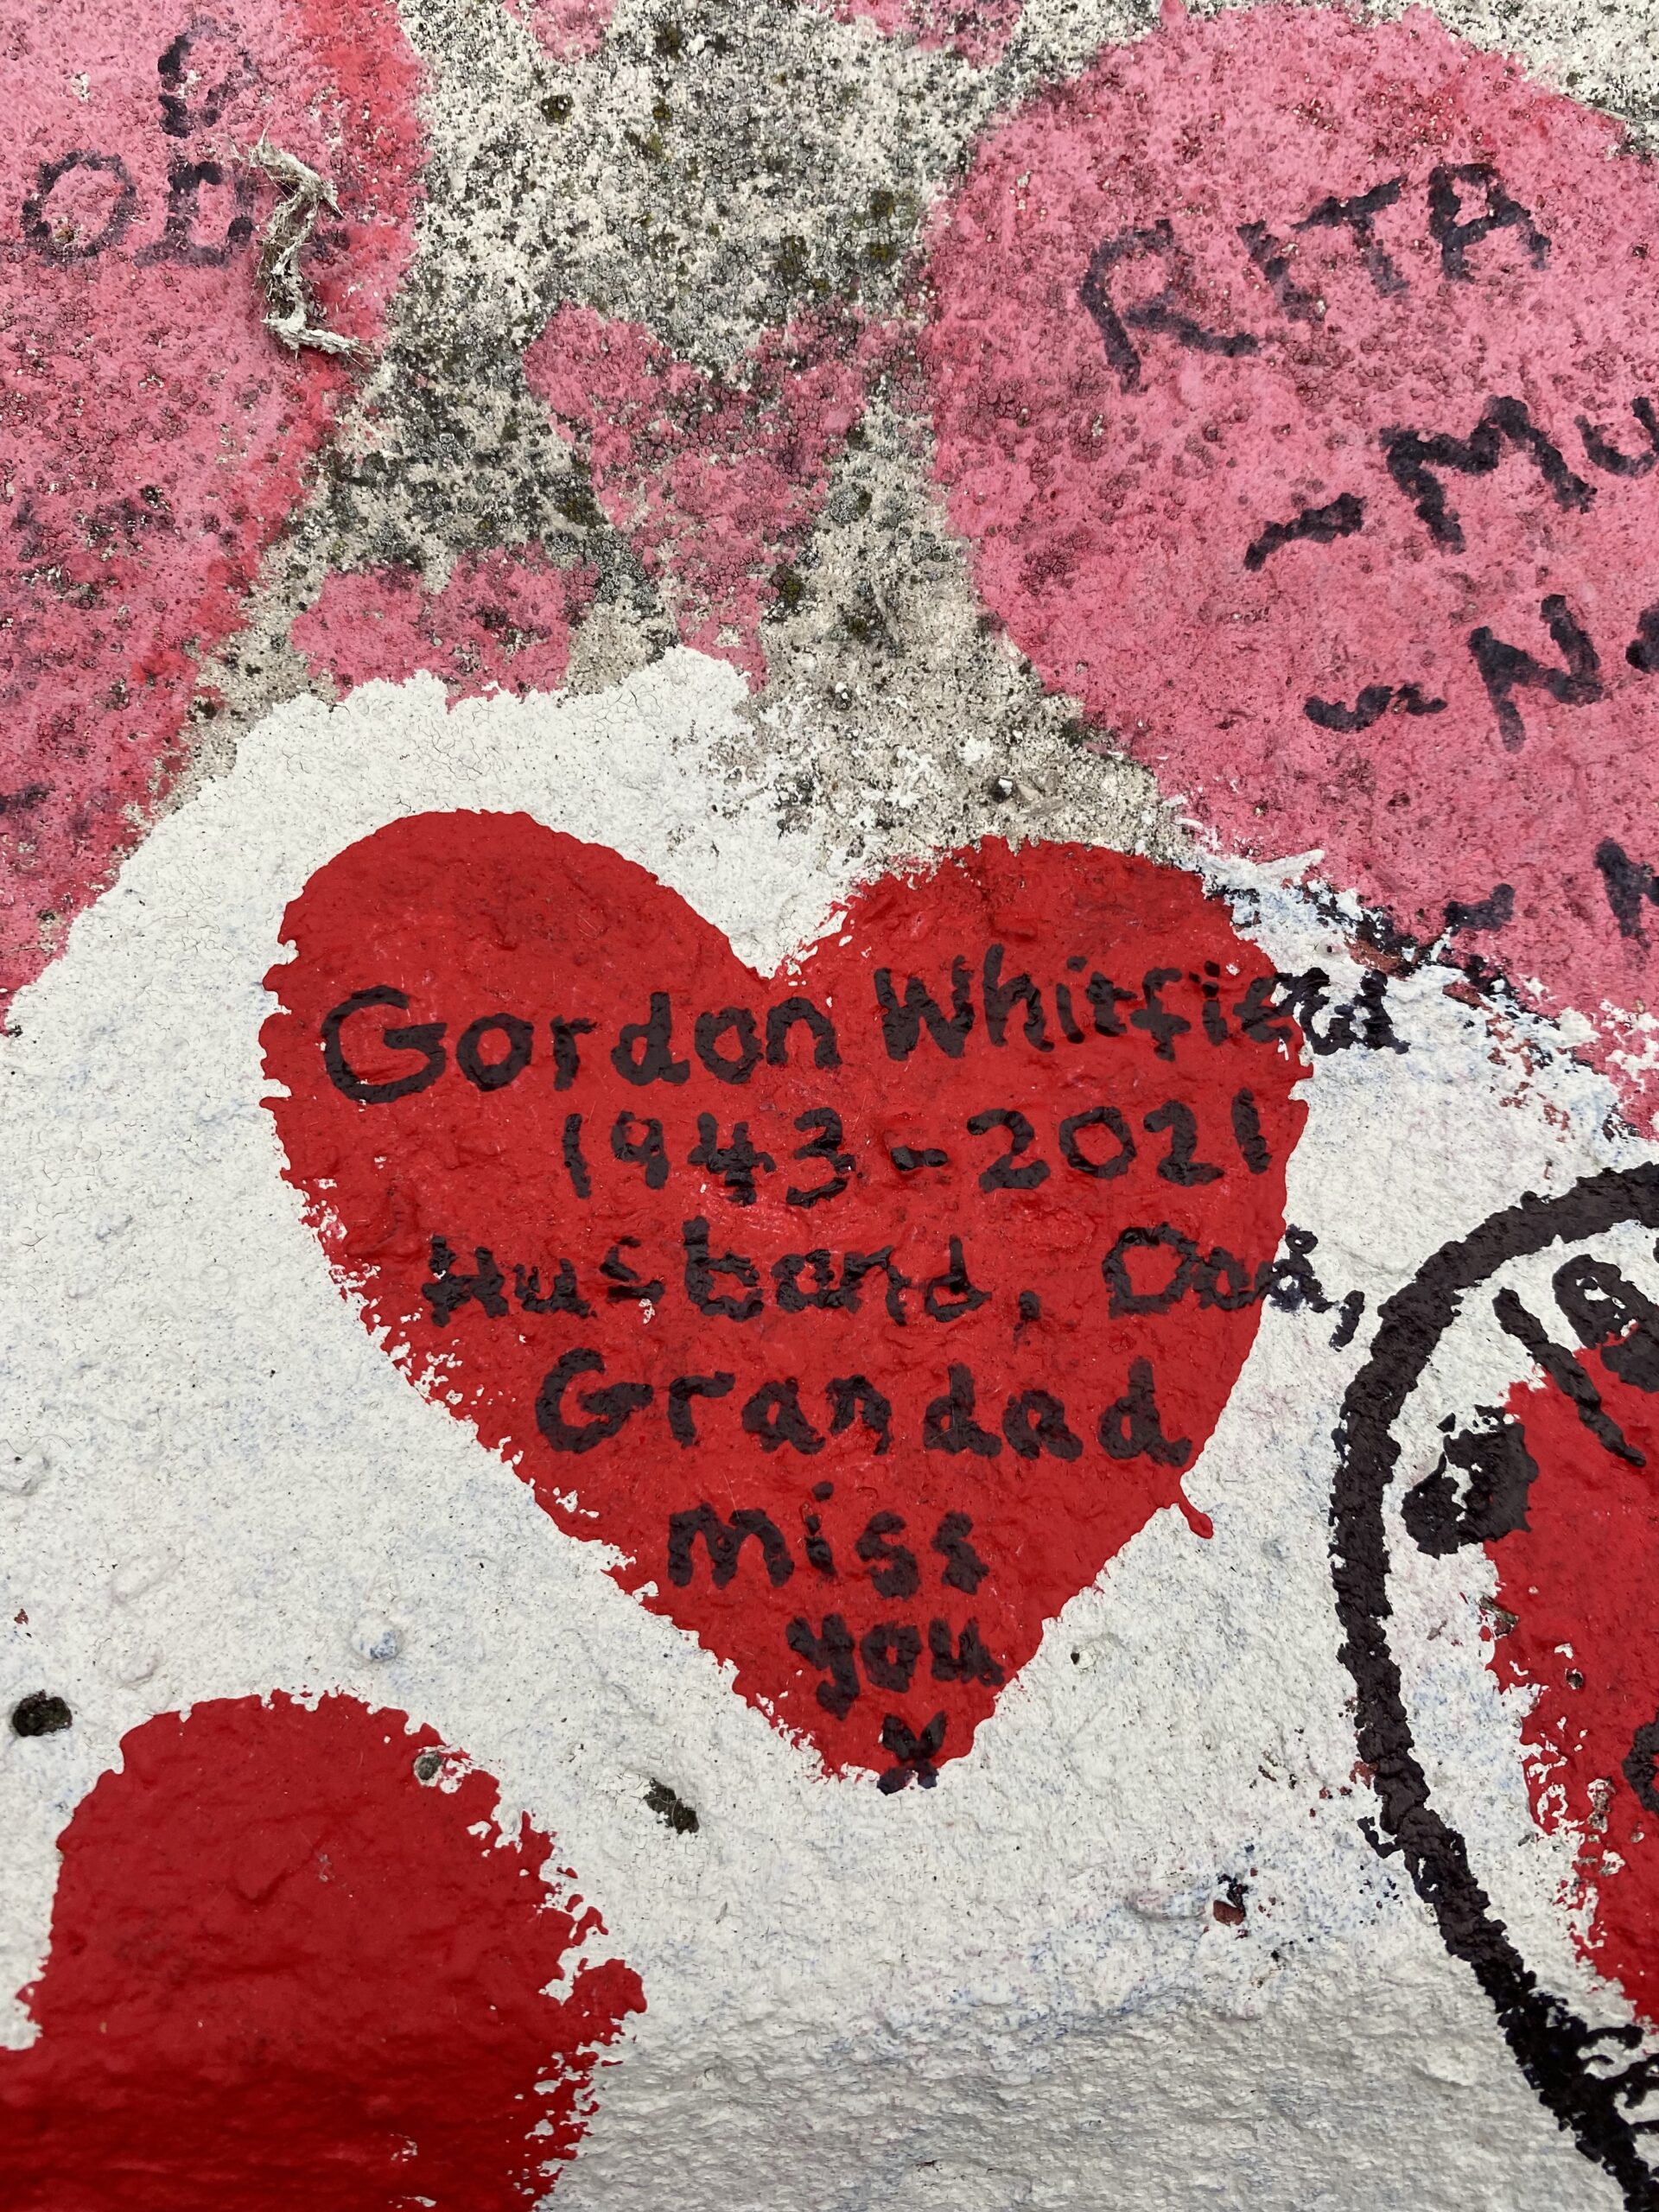 Close-up photo of the COVID-19 Memorial Wall with a red heart in Gordon Whitfield's memory. The rest of the wall is covered by red and pink hearts along with the names of deceased loved ones